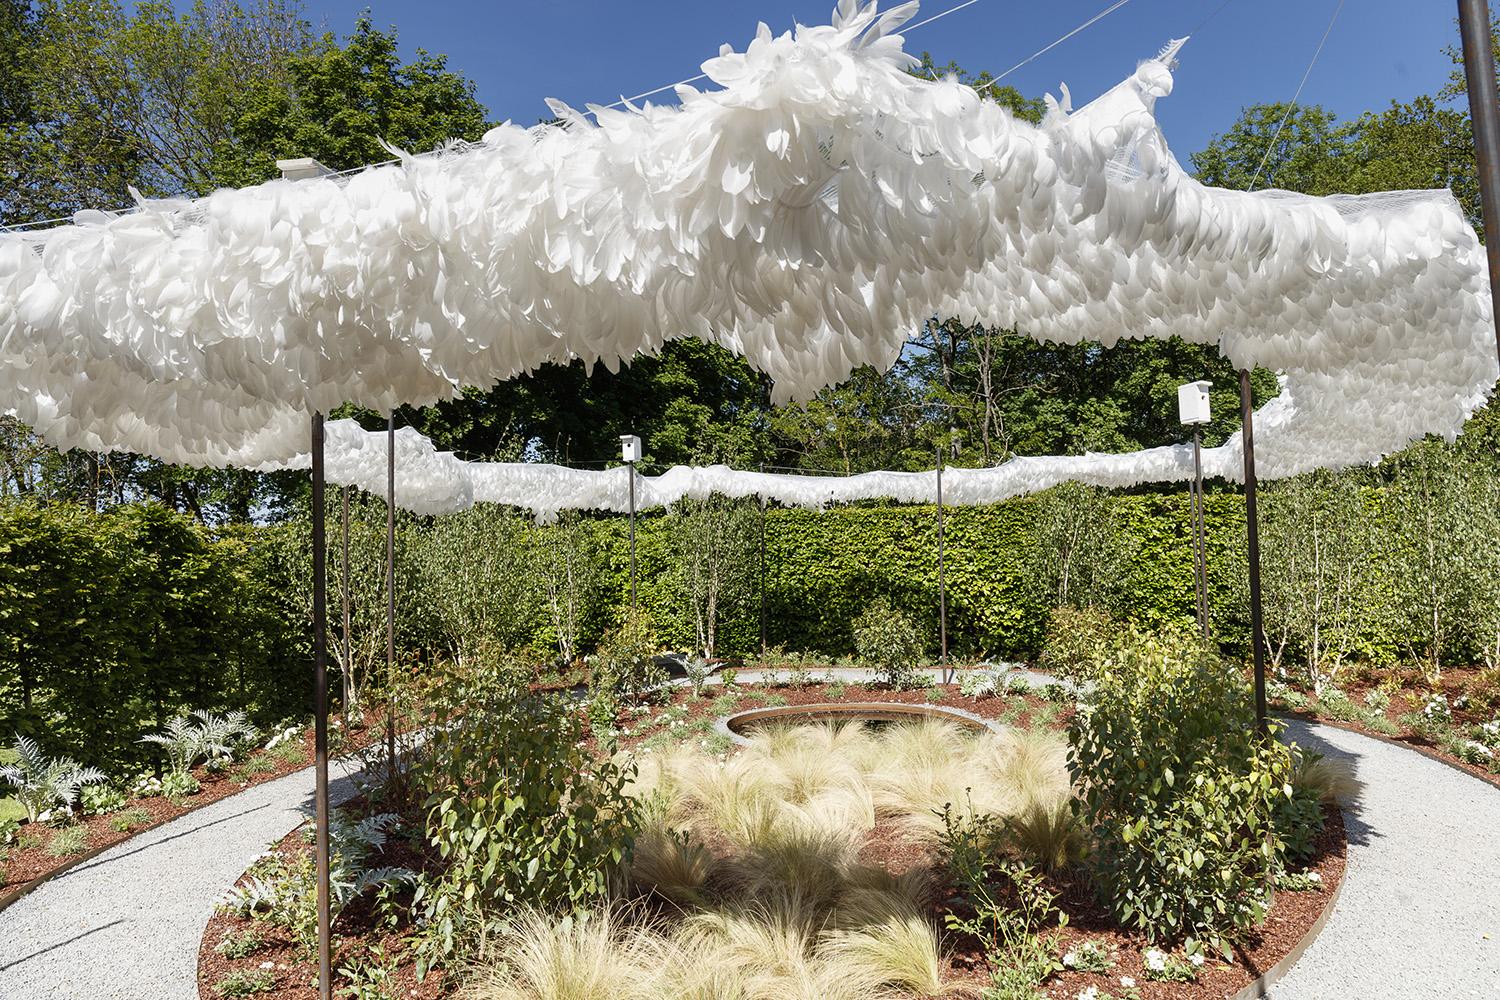 Its centerpiece is a canopy of 46,000 white goose feathers sewn onto cotton bias and attached via snap ties to a near-transparent mesh netting, hung by cables attached to steel poles.